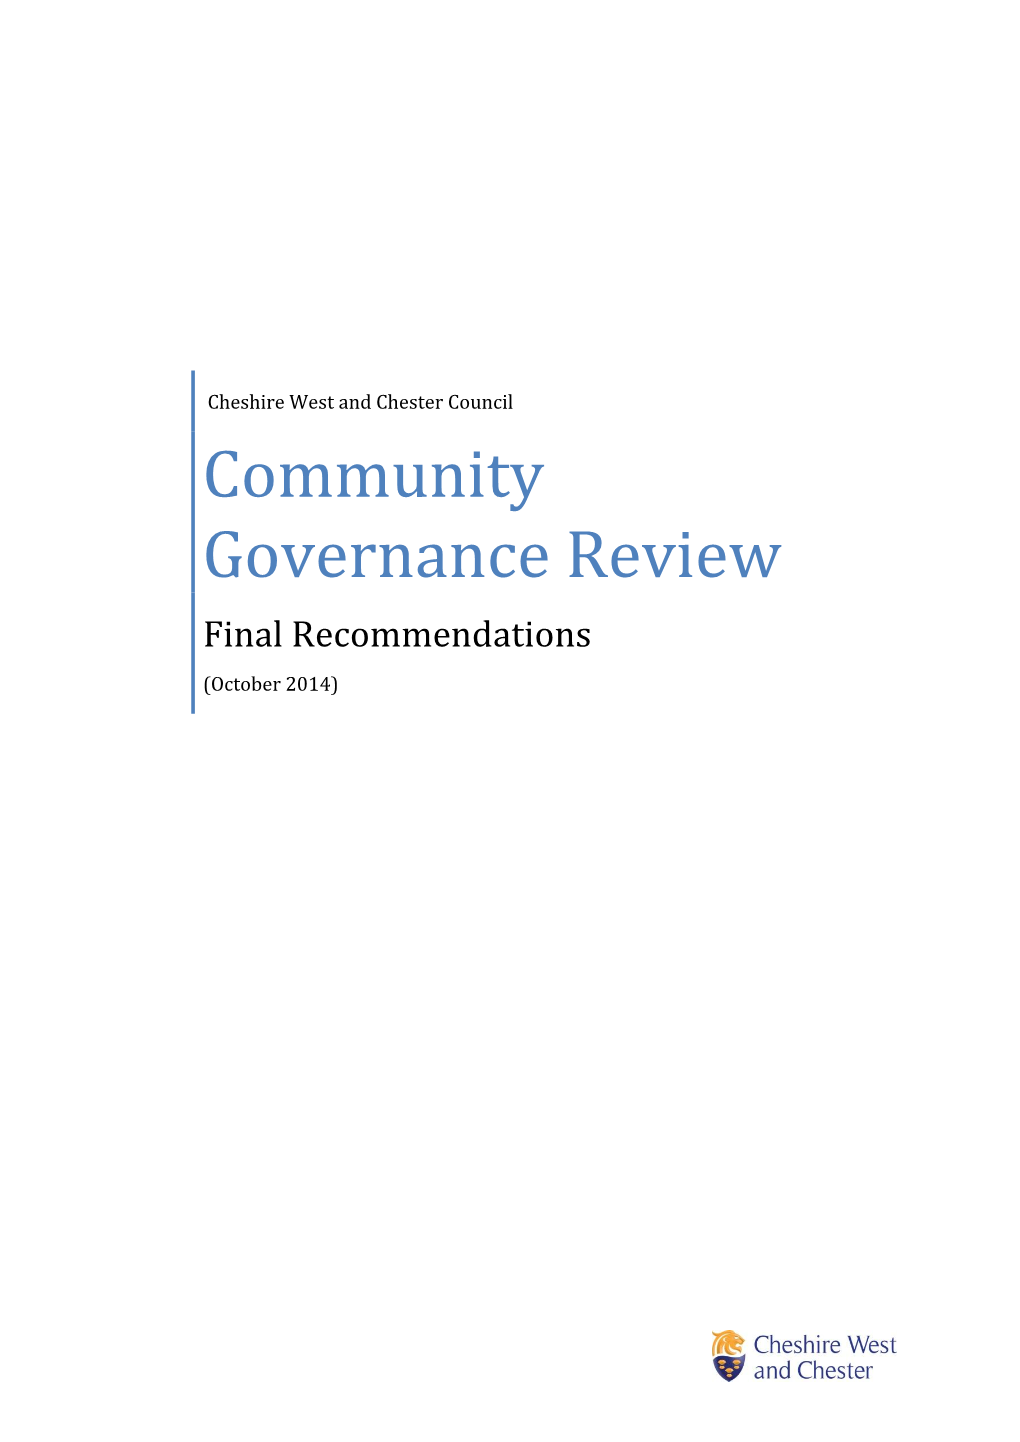 Community Governance Review Final Recommendations